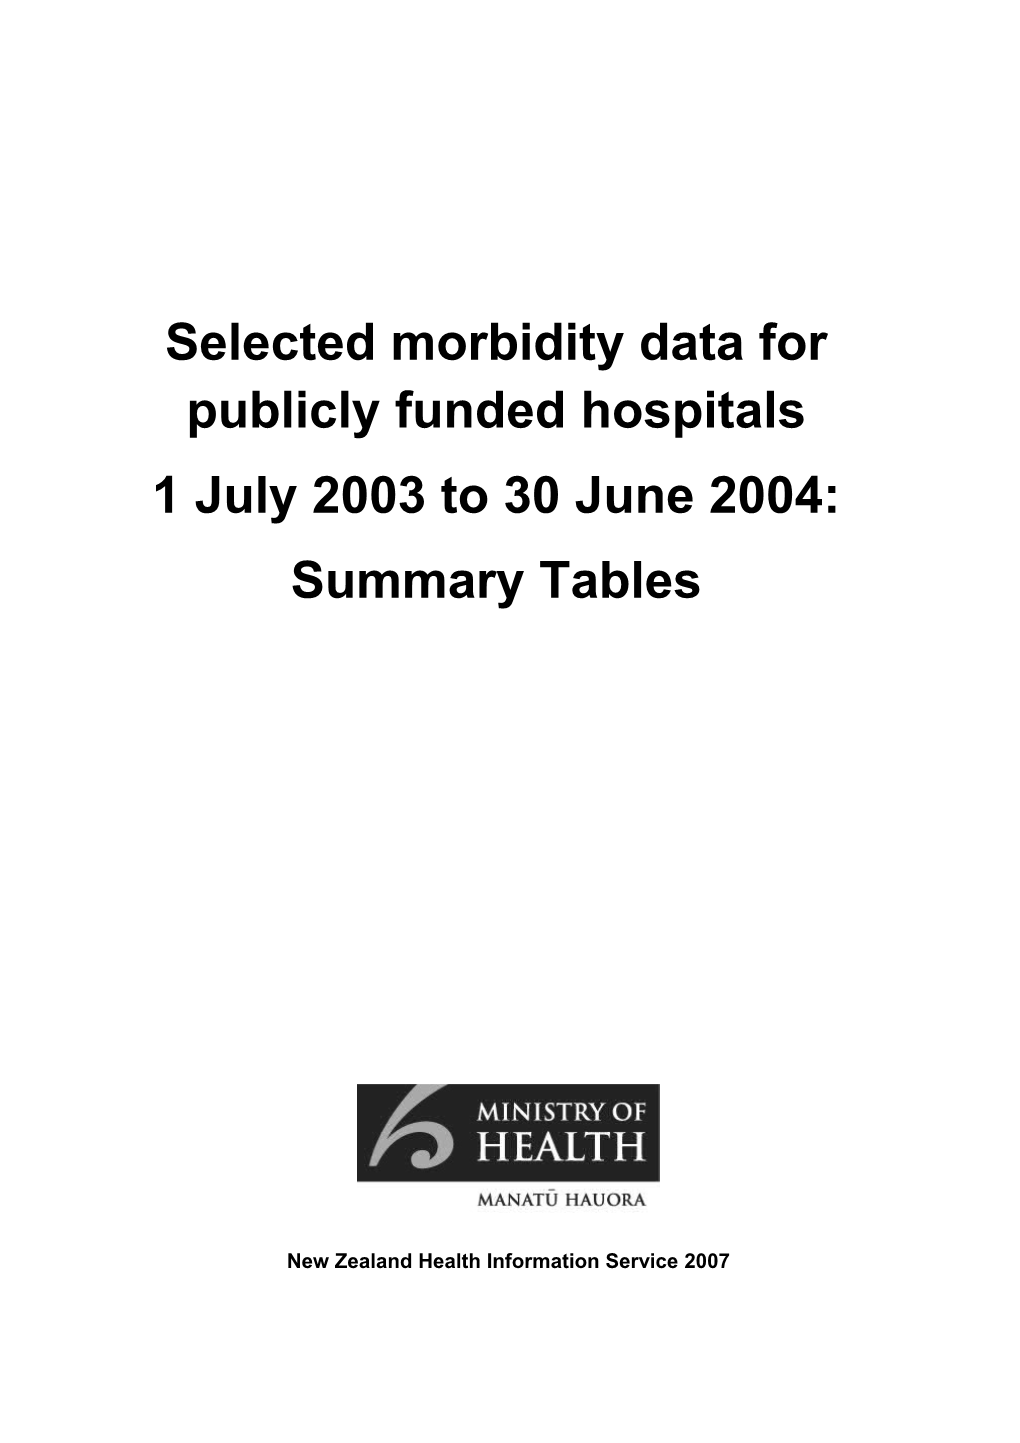 Selected Morbidity Data for Publicly Funded Hospitals